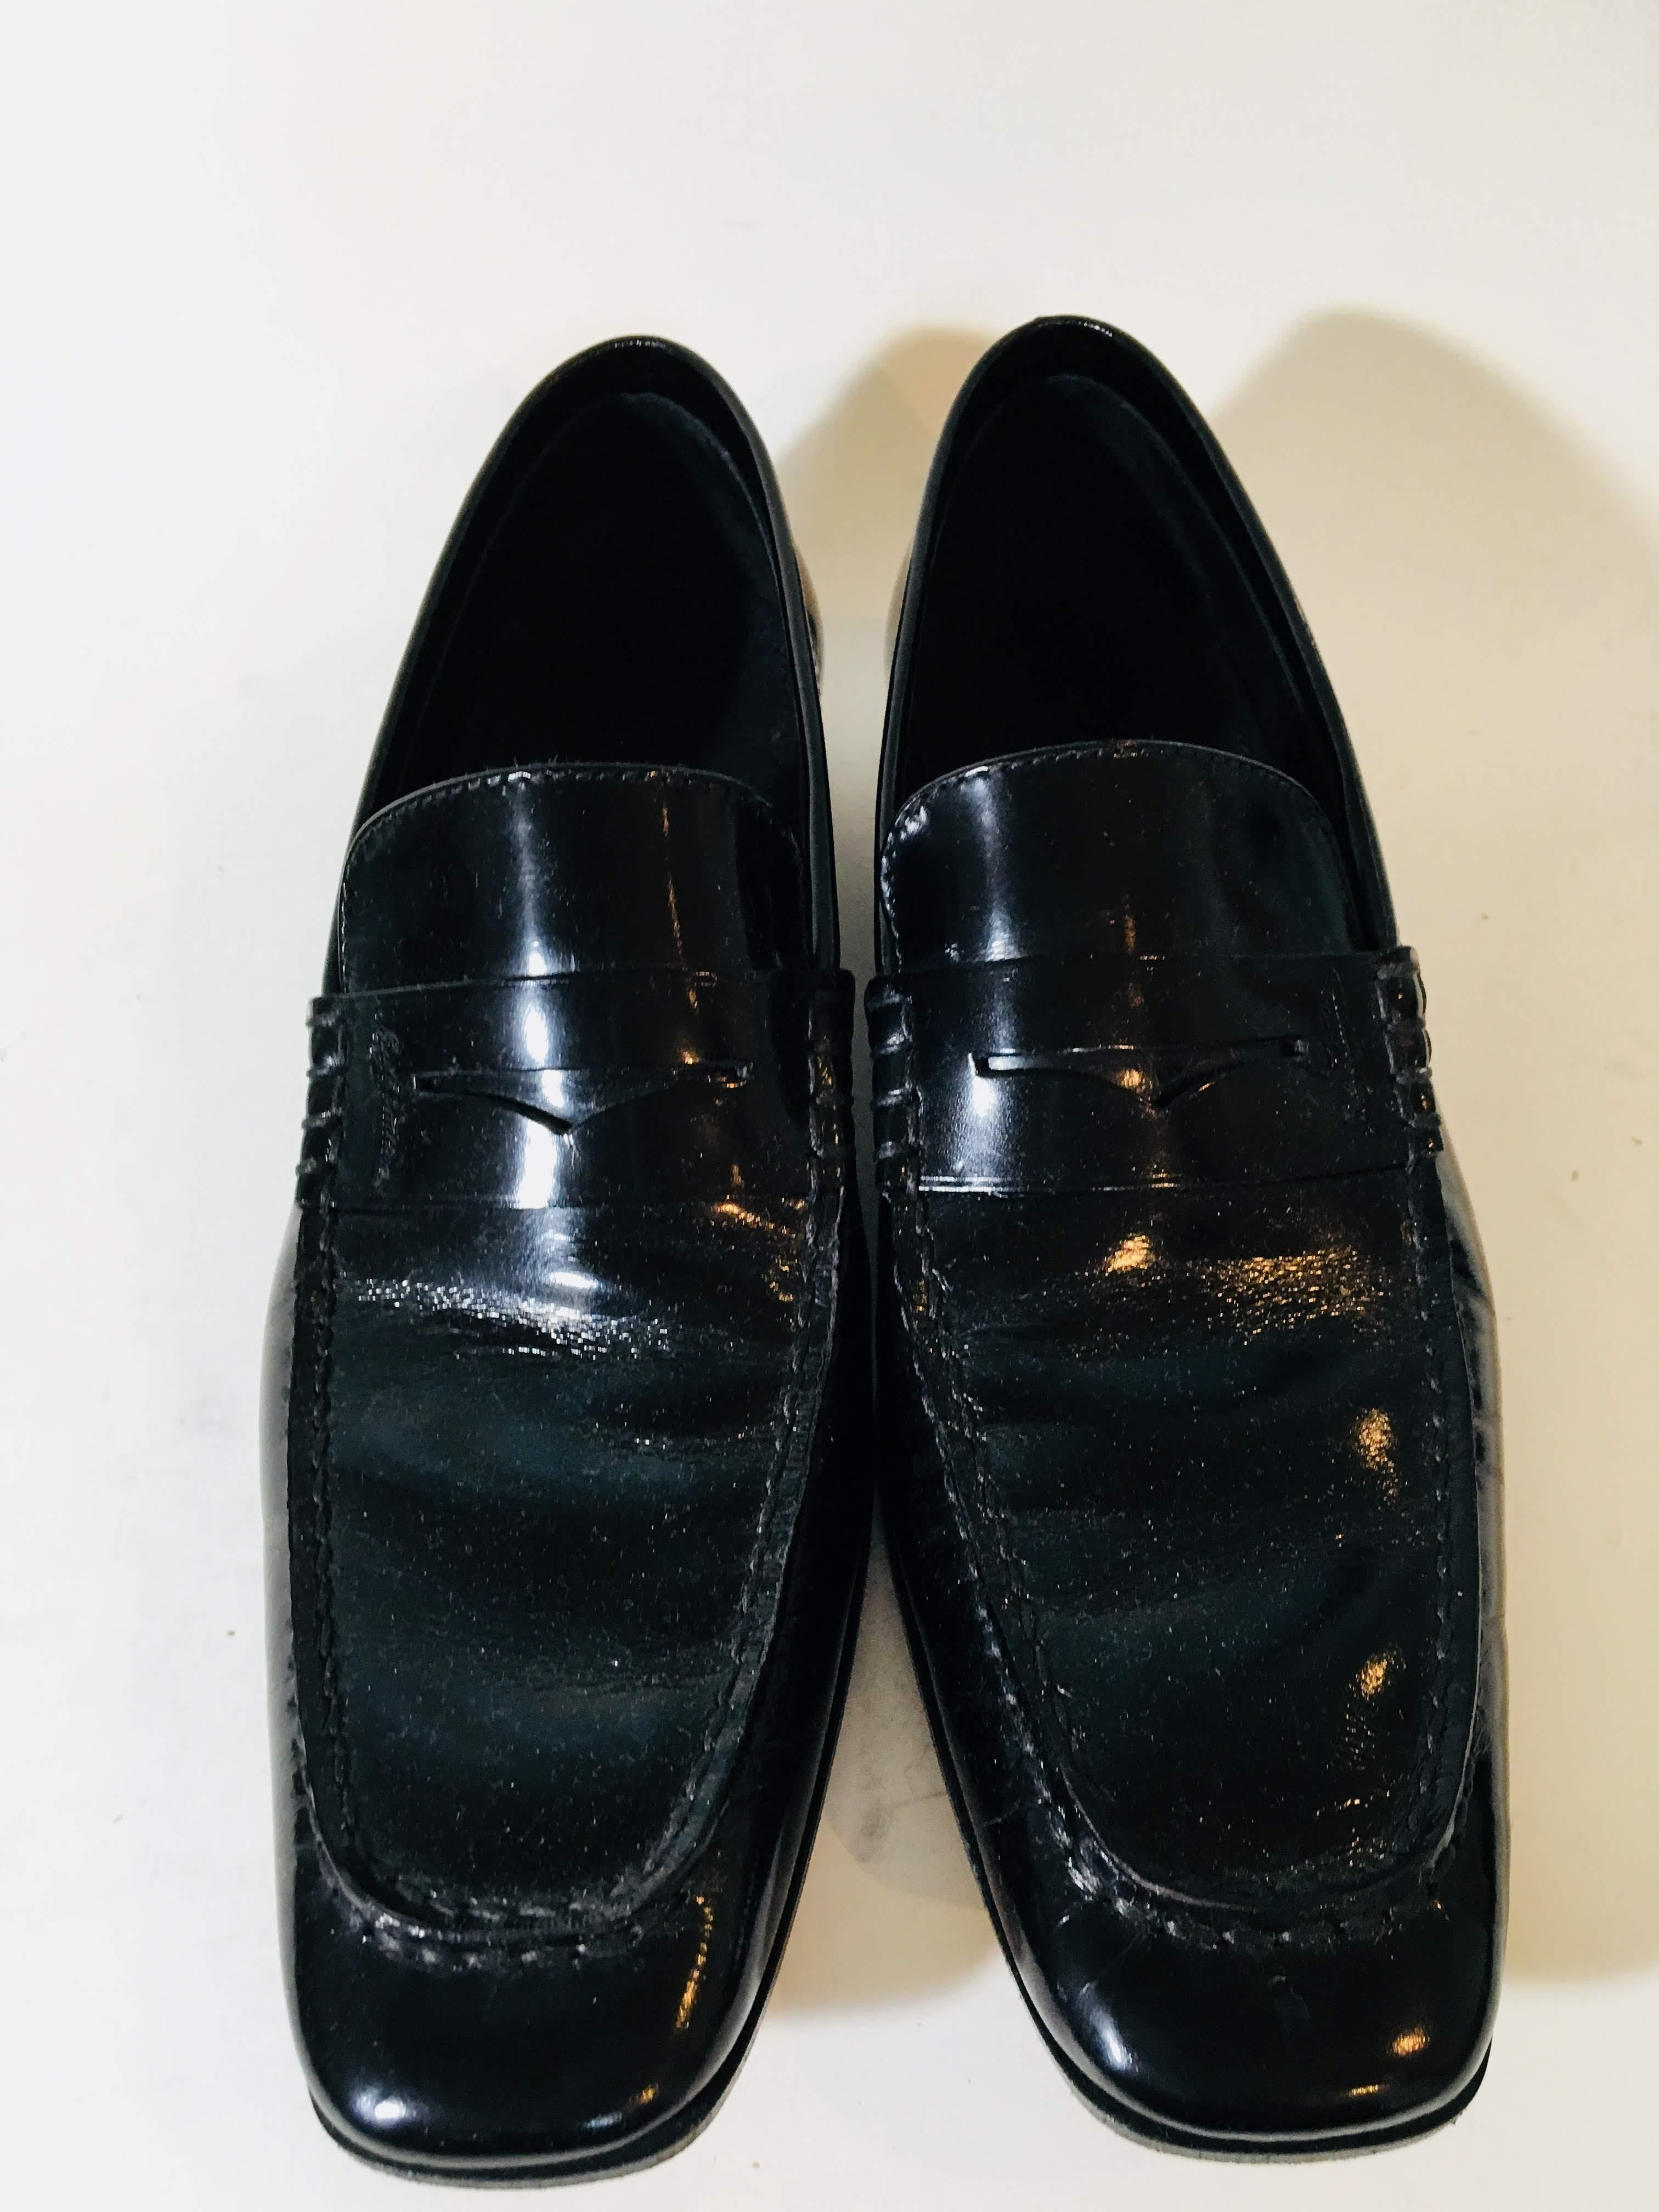 Louis Vuitton Black Leather Penny Loafers Square Toe.